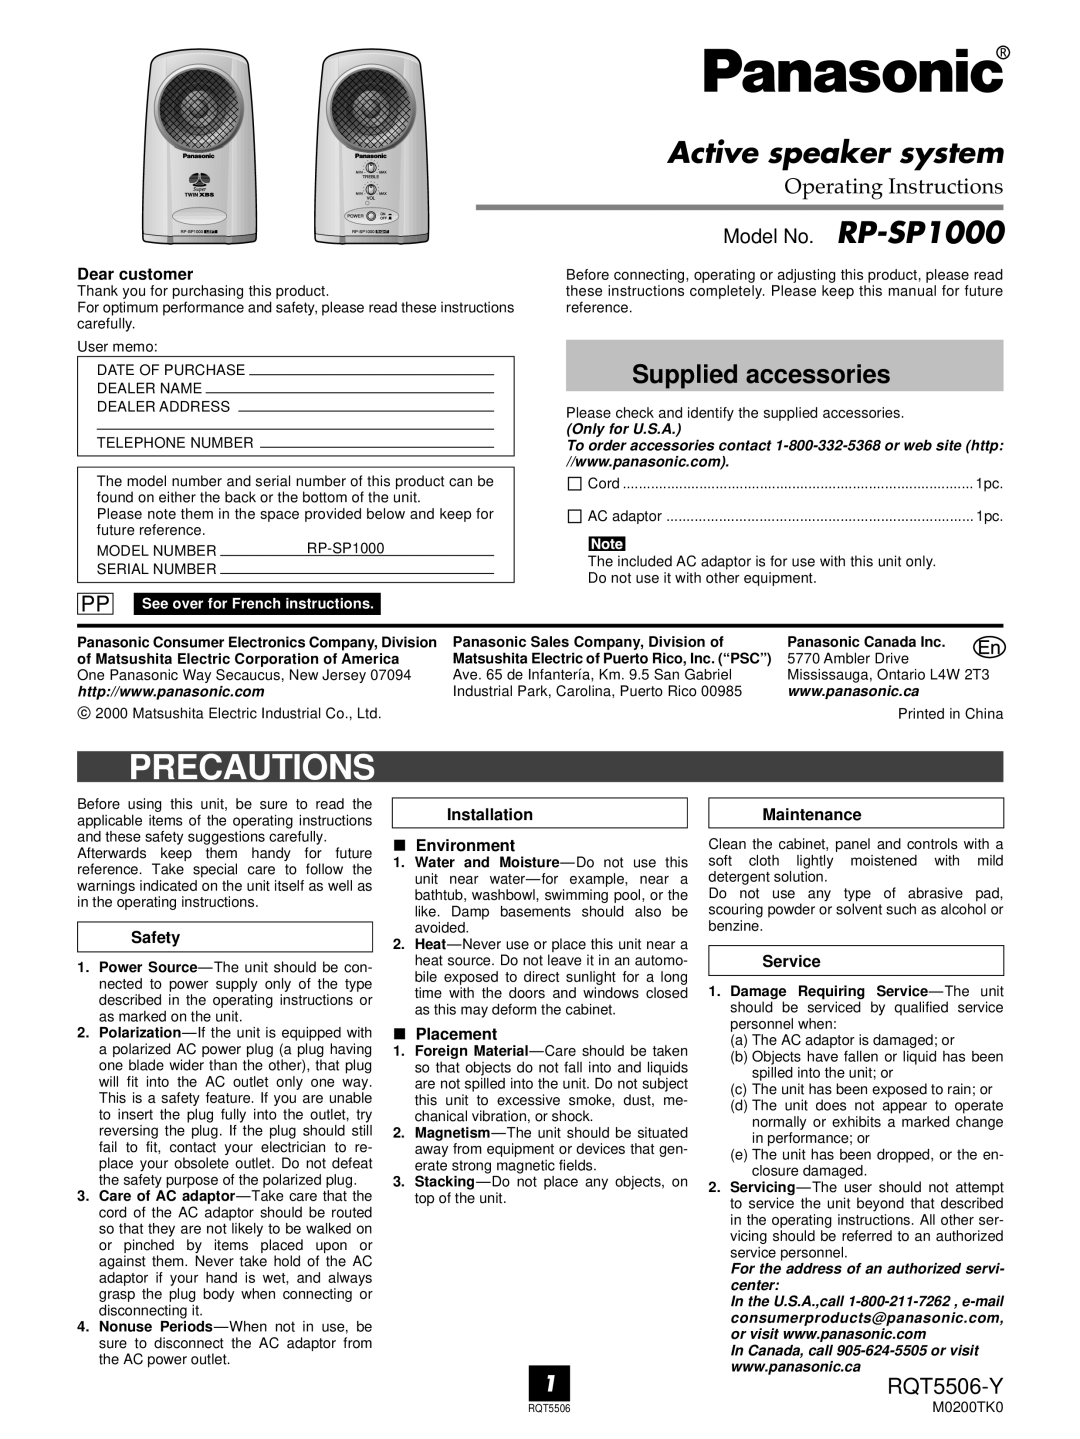 Panasonic RP-SP1000 operating instructions Precautions, Active speaker system, Supplied accessories, RQT5506-Y 